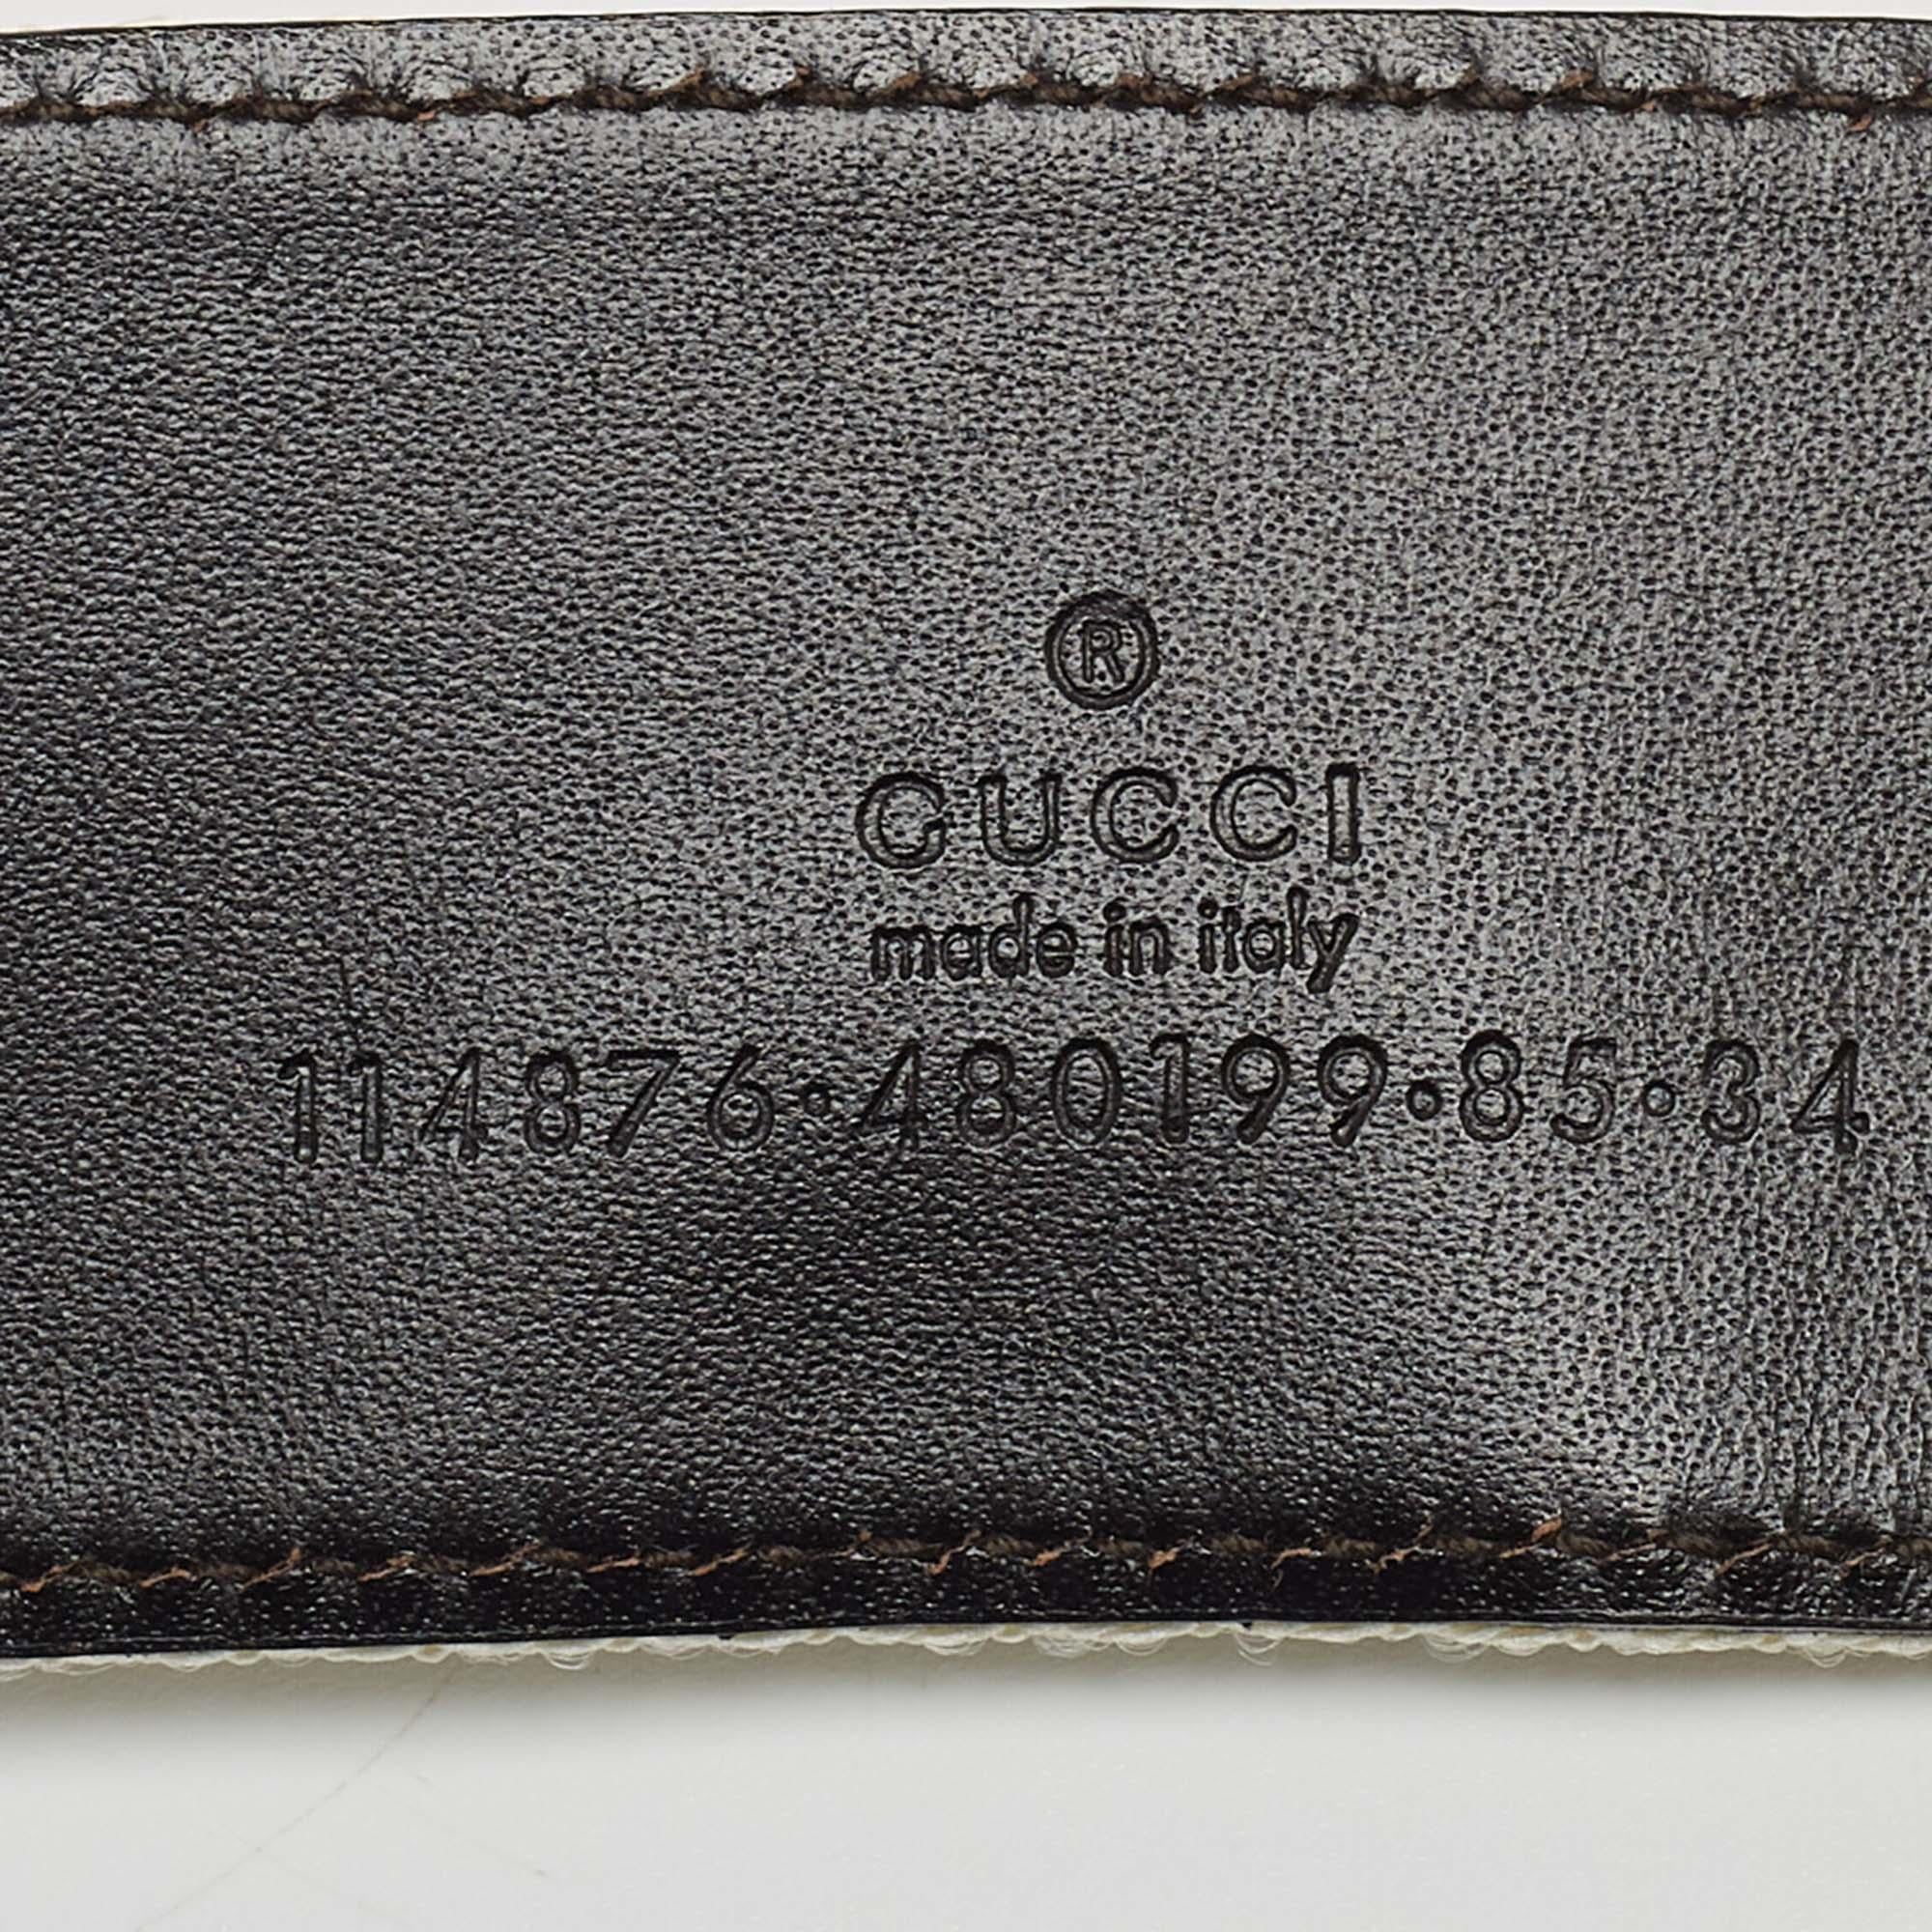 Gucci Multicolor Leather and Web Canvas Interlocking G Buckle Belt 85 CM 1